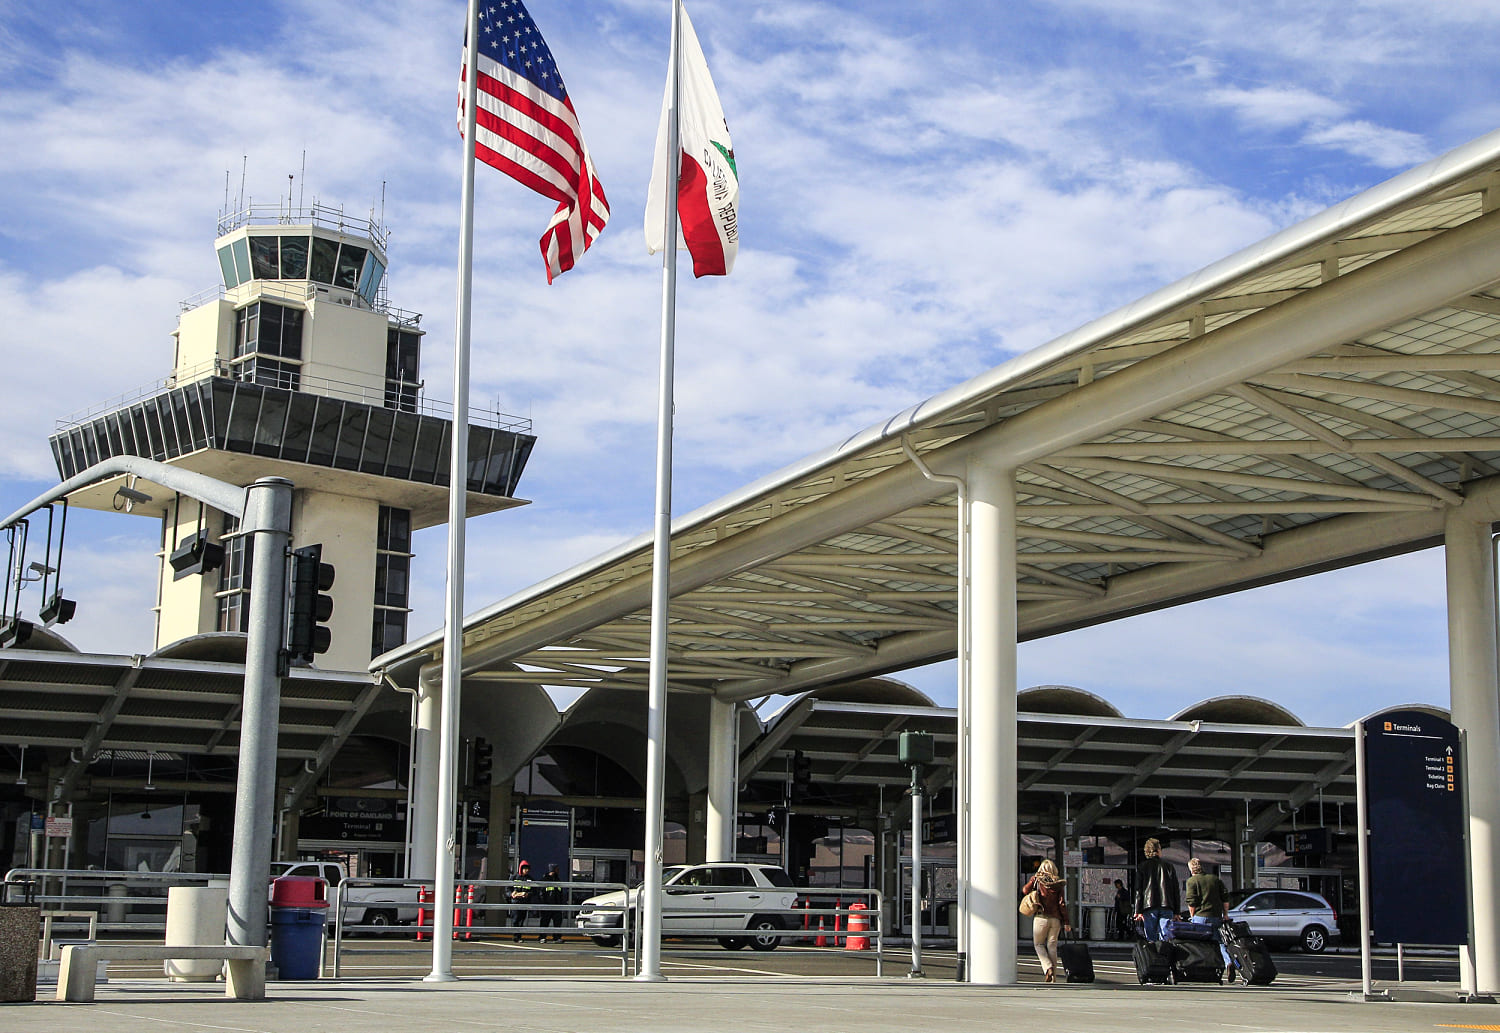 Oakland officials vote to include 'San Francisco' in airport's name, despite opposition